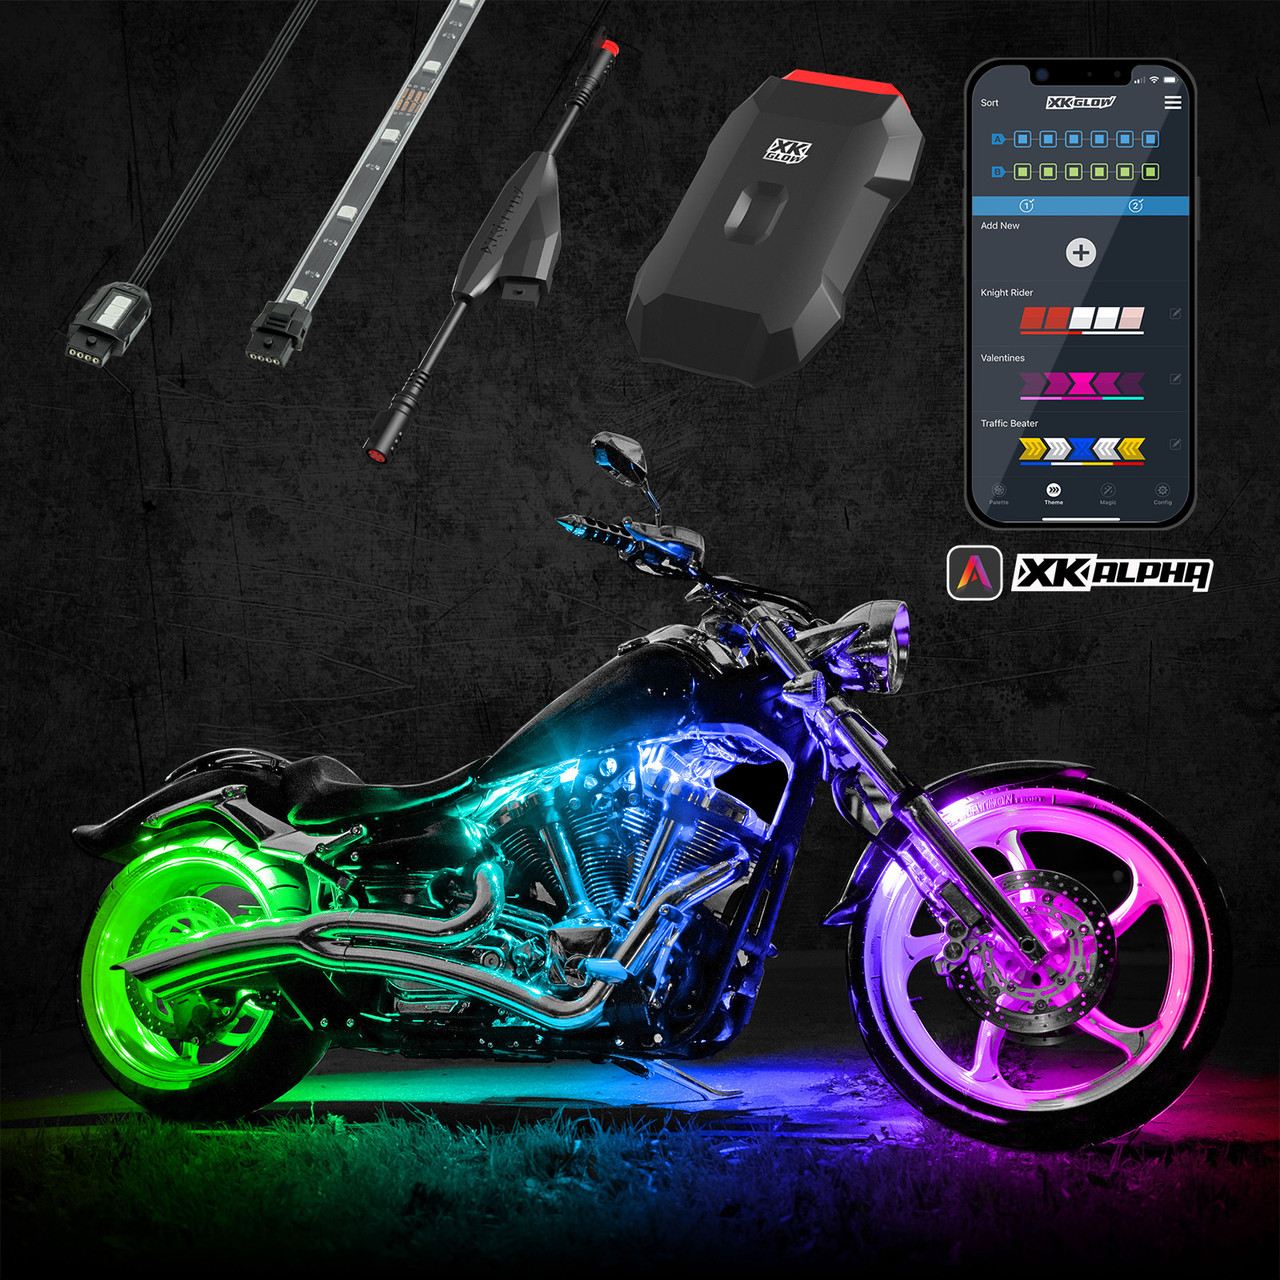 XKalpha Motorcycle Underglow Light Kit with RGB Color Chasing |  App-controlled